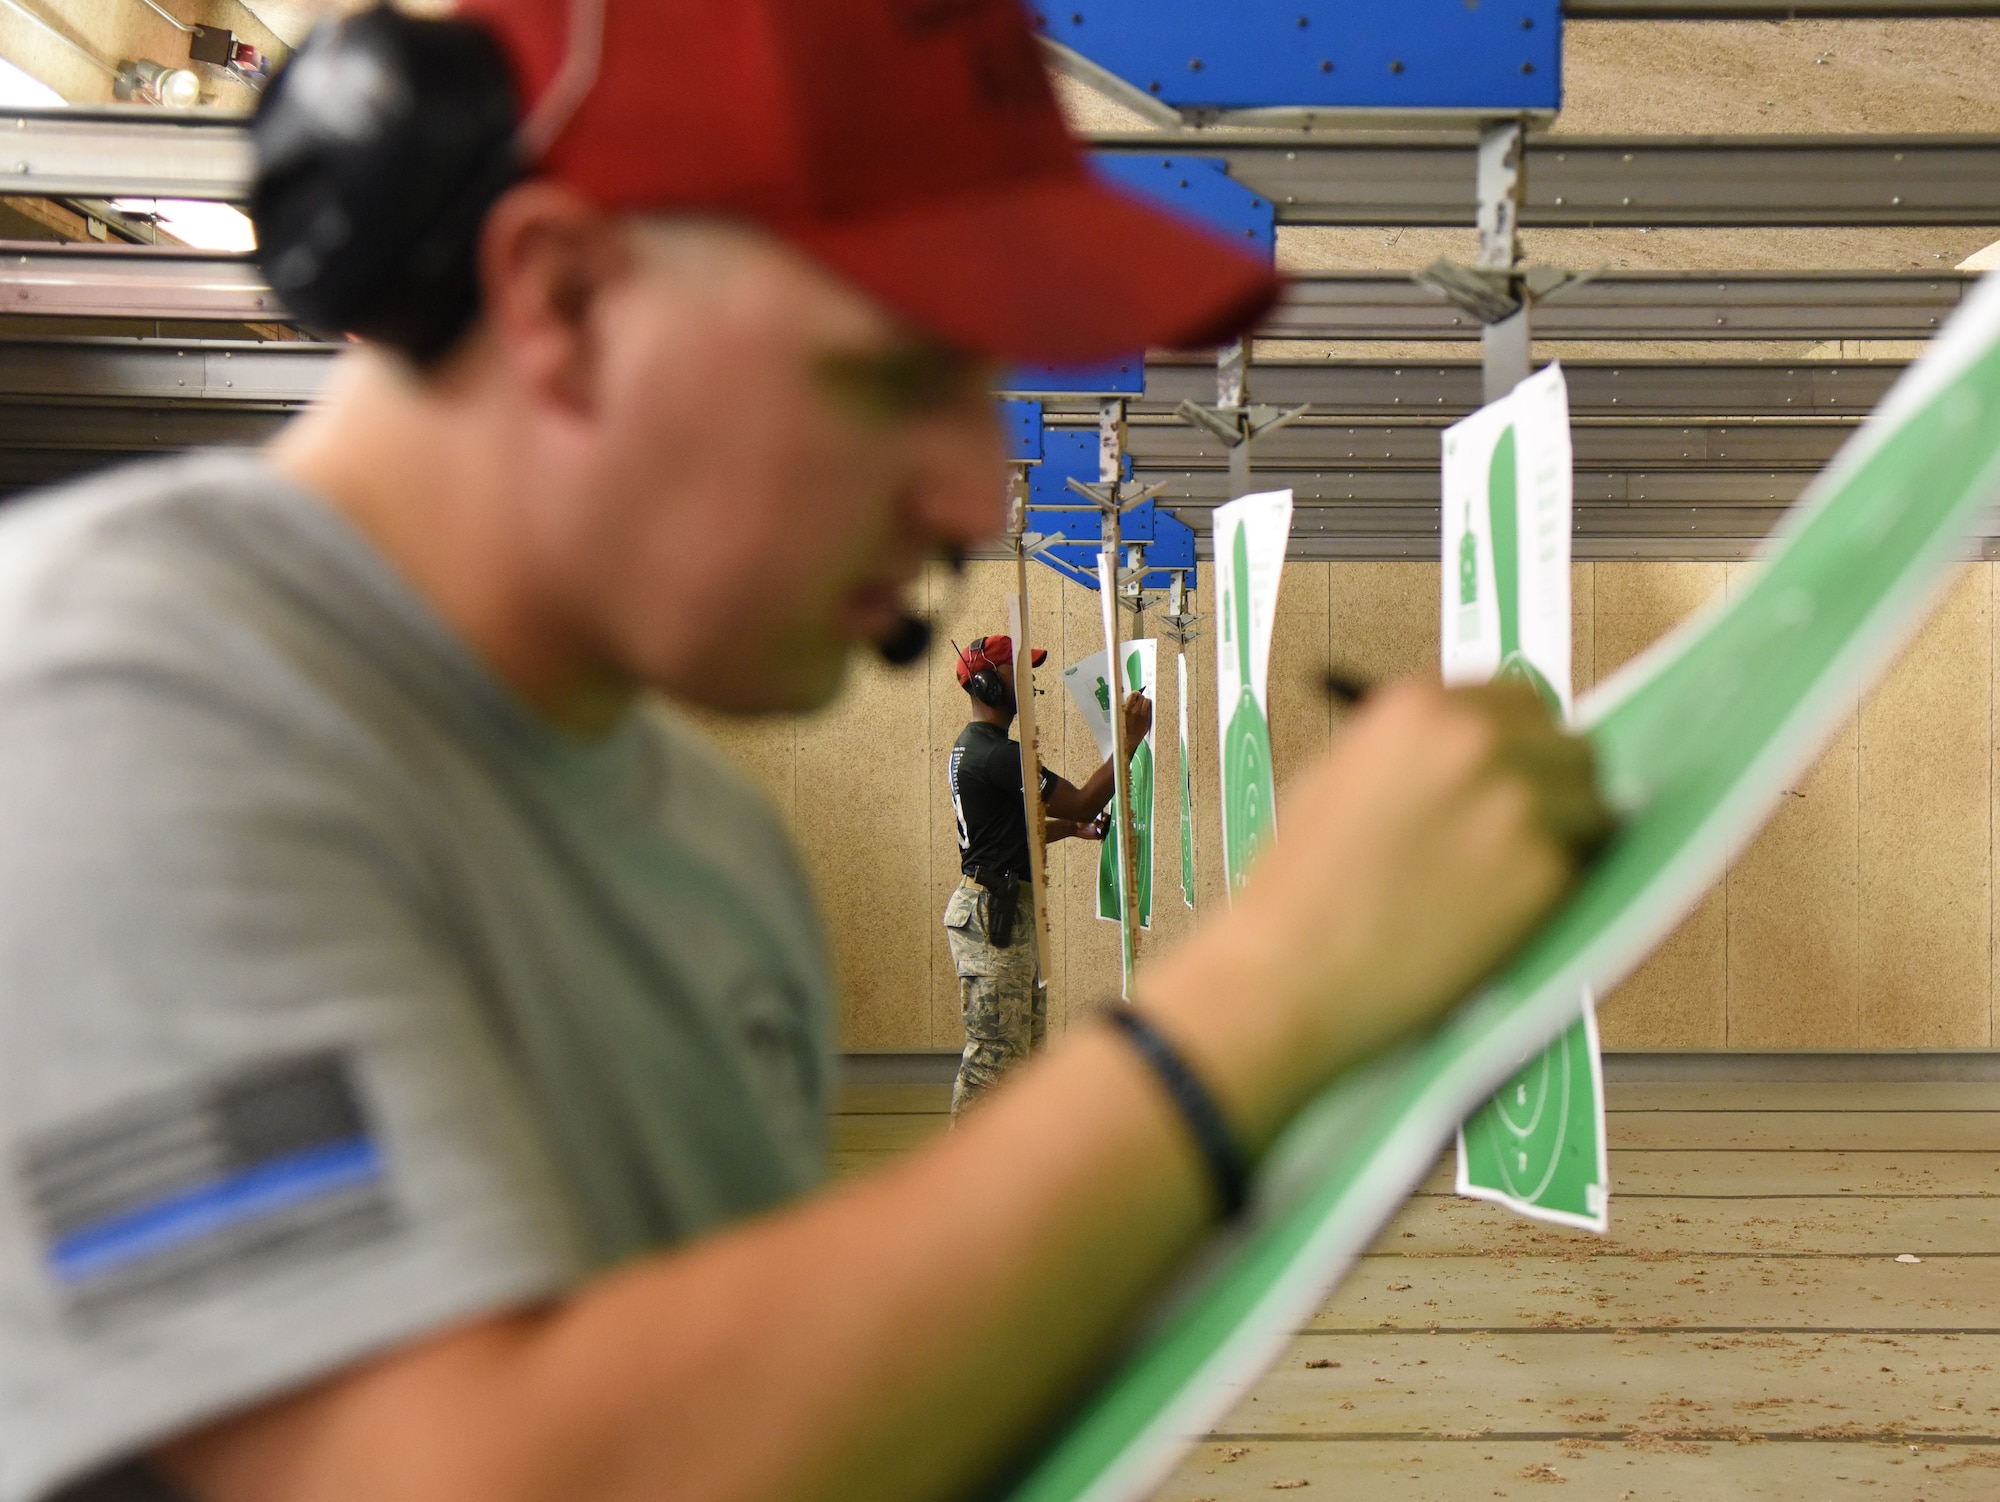 U.S. Air Force Staff Sgt. Derek Gioia, left, and Thane Sandy, 81st Security Forces Squadron combat arms instructors, calculates target scores during the 81st SFS law enforcement team competition shoot in the indoor firing range at Keesler Air Force Base, Mississippi, May 16, 2018. The event was held during National Police Week, which recognizes the service of law enforcement men and women who put their lives at risk every day. (U.S. Air Force photo by Kemberly Groue)